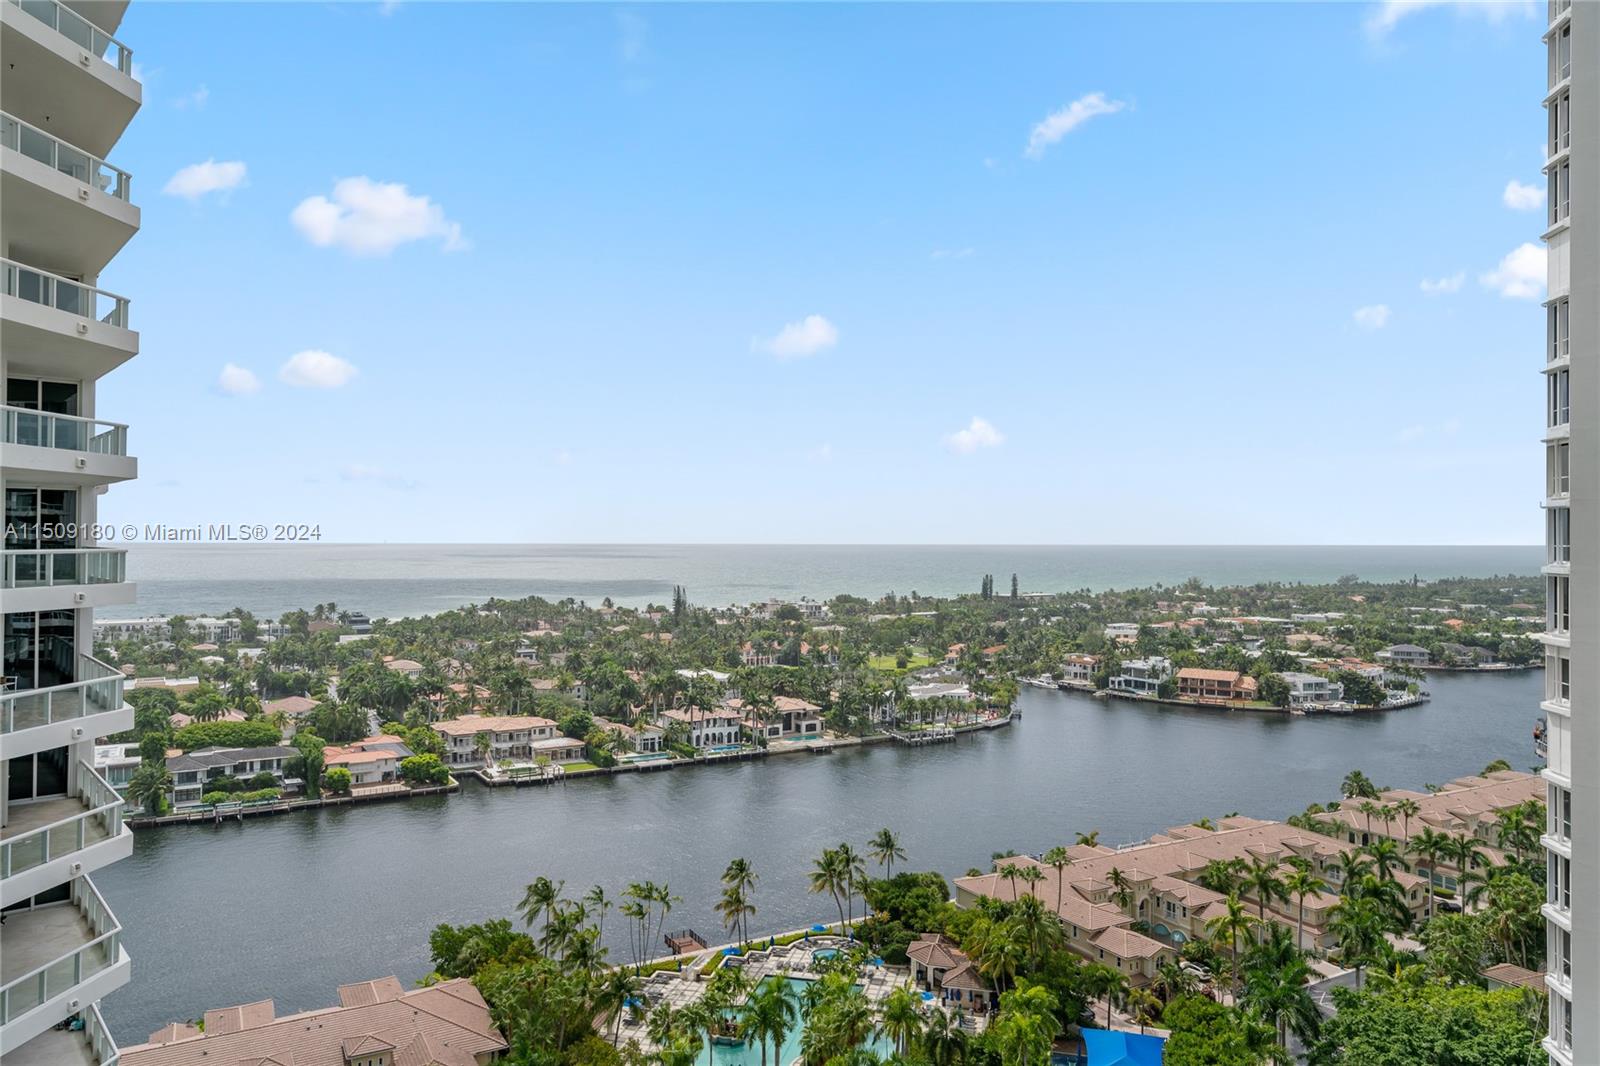 Beautiful residence at the prestigious Atlantic One in Aventura, this unit features three bedrooms, three full bathrooms, a powder room, and two balconies. The South-facing balcony provides views of the ocean and the Intracoastal Waterway, while the West-facing balcony captures the beauty of Golden Isles, The Gulfstream Park, and extends as far as the iconic Guitar Hotel. The kitchen offers views of the South side.
This exceptional home is located in one of South Florida's finest buildings, The Point of Aventura, known for its resort-style living. Residents enjoy access to a clubhouse with a gym, fitness classes, spa, cafe, four tennis courts, a playground, barbecue areas, and three swimming pools.